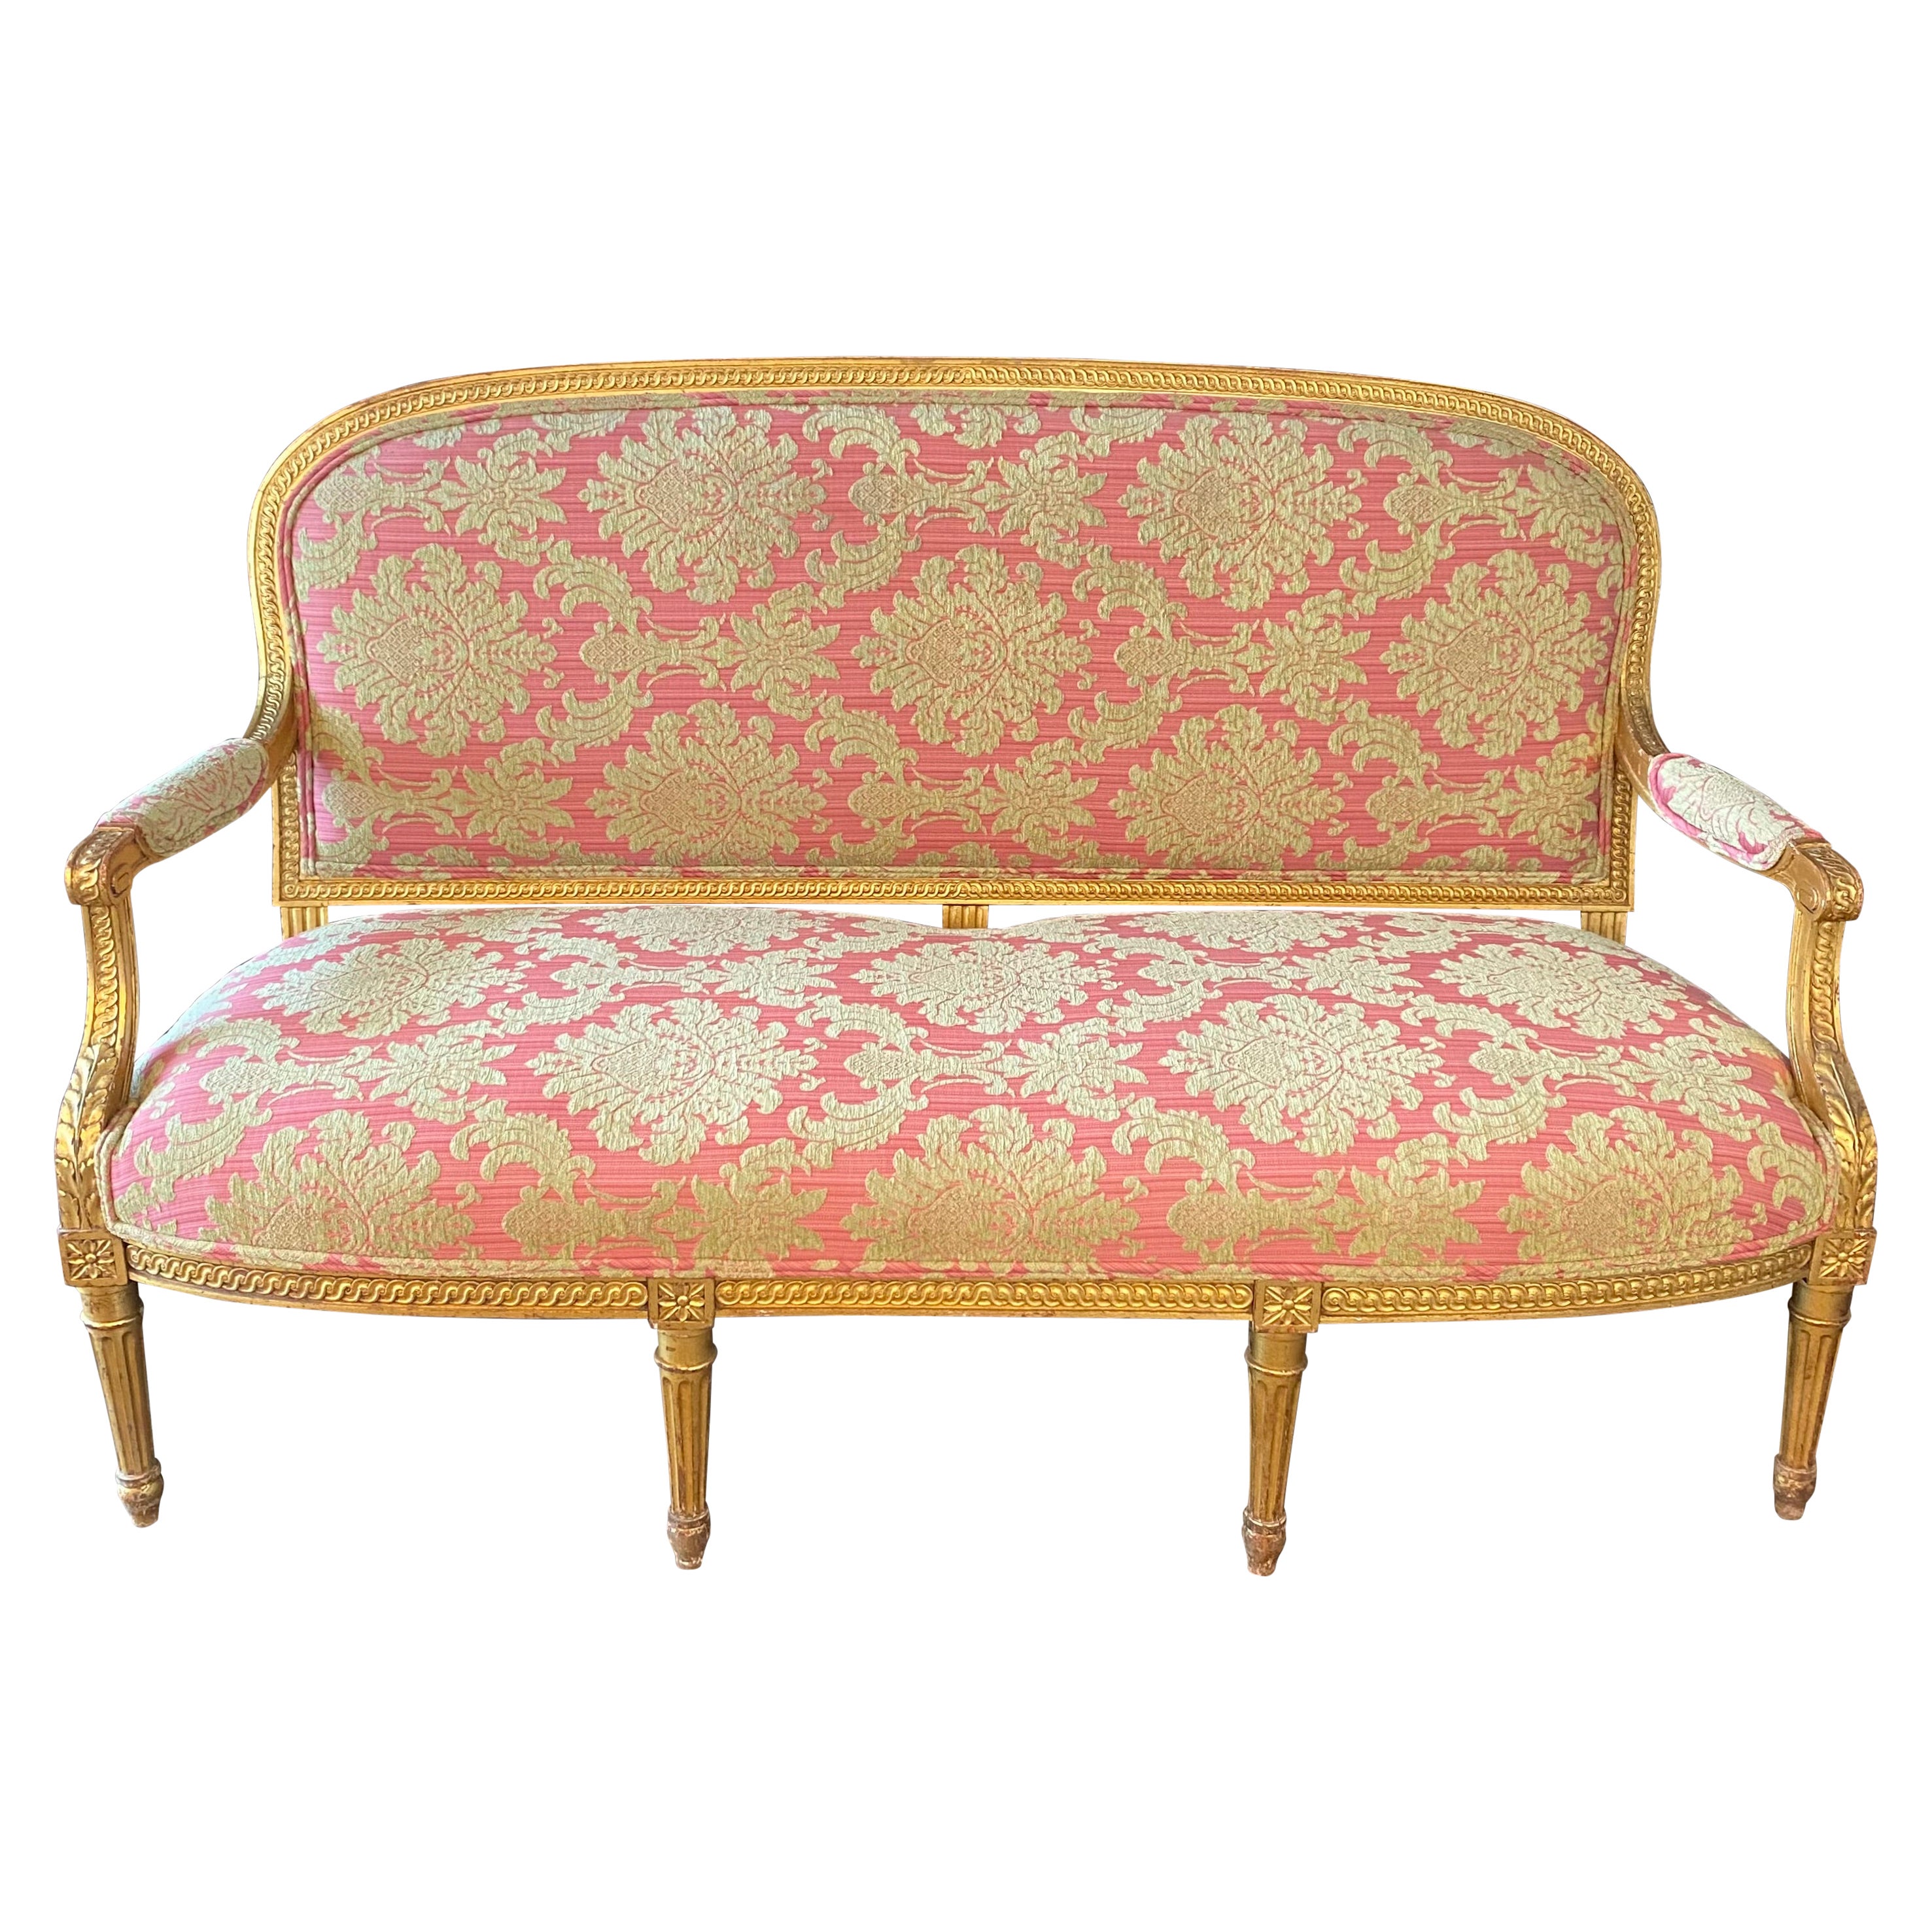 Glamorous French Louis XVI Style Gold Giltwood Sofa with Damask Upholstery